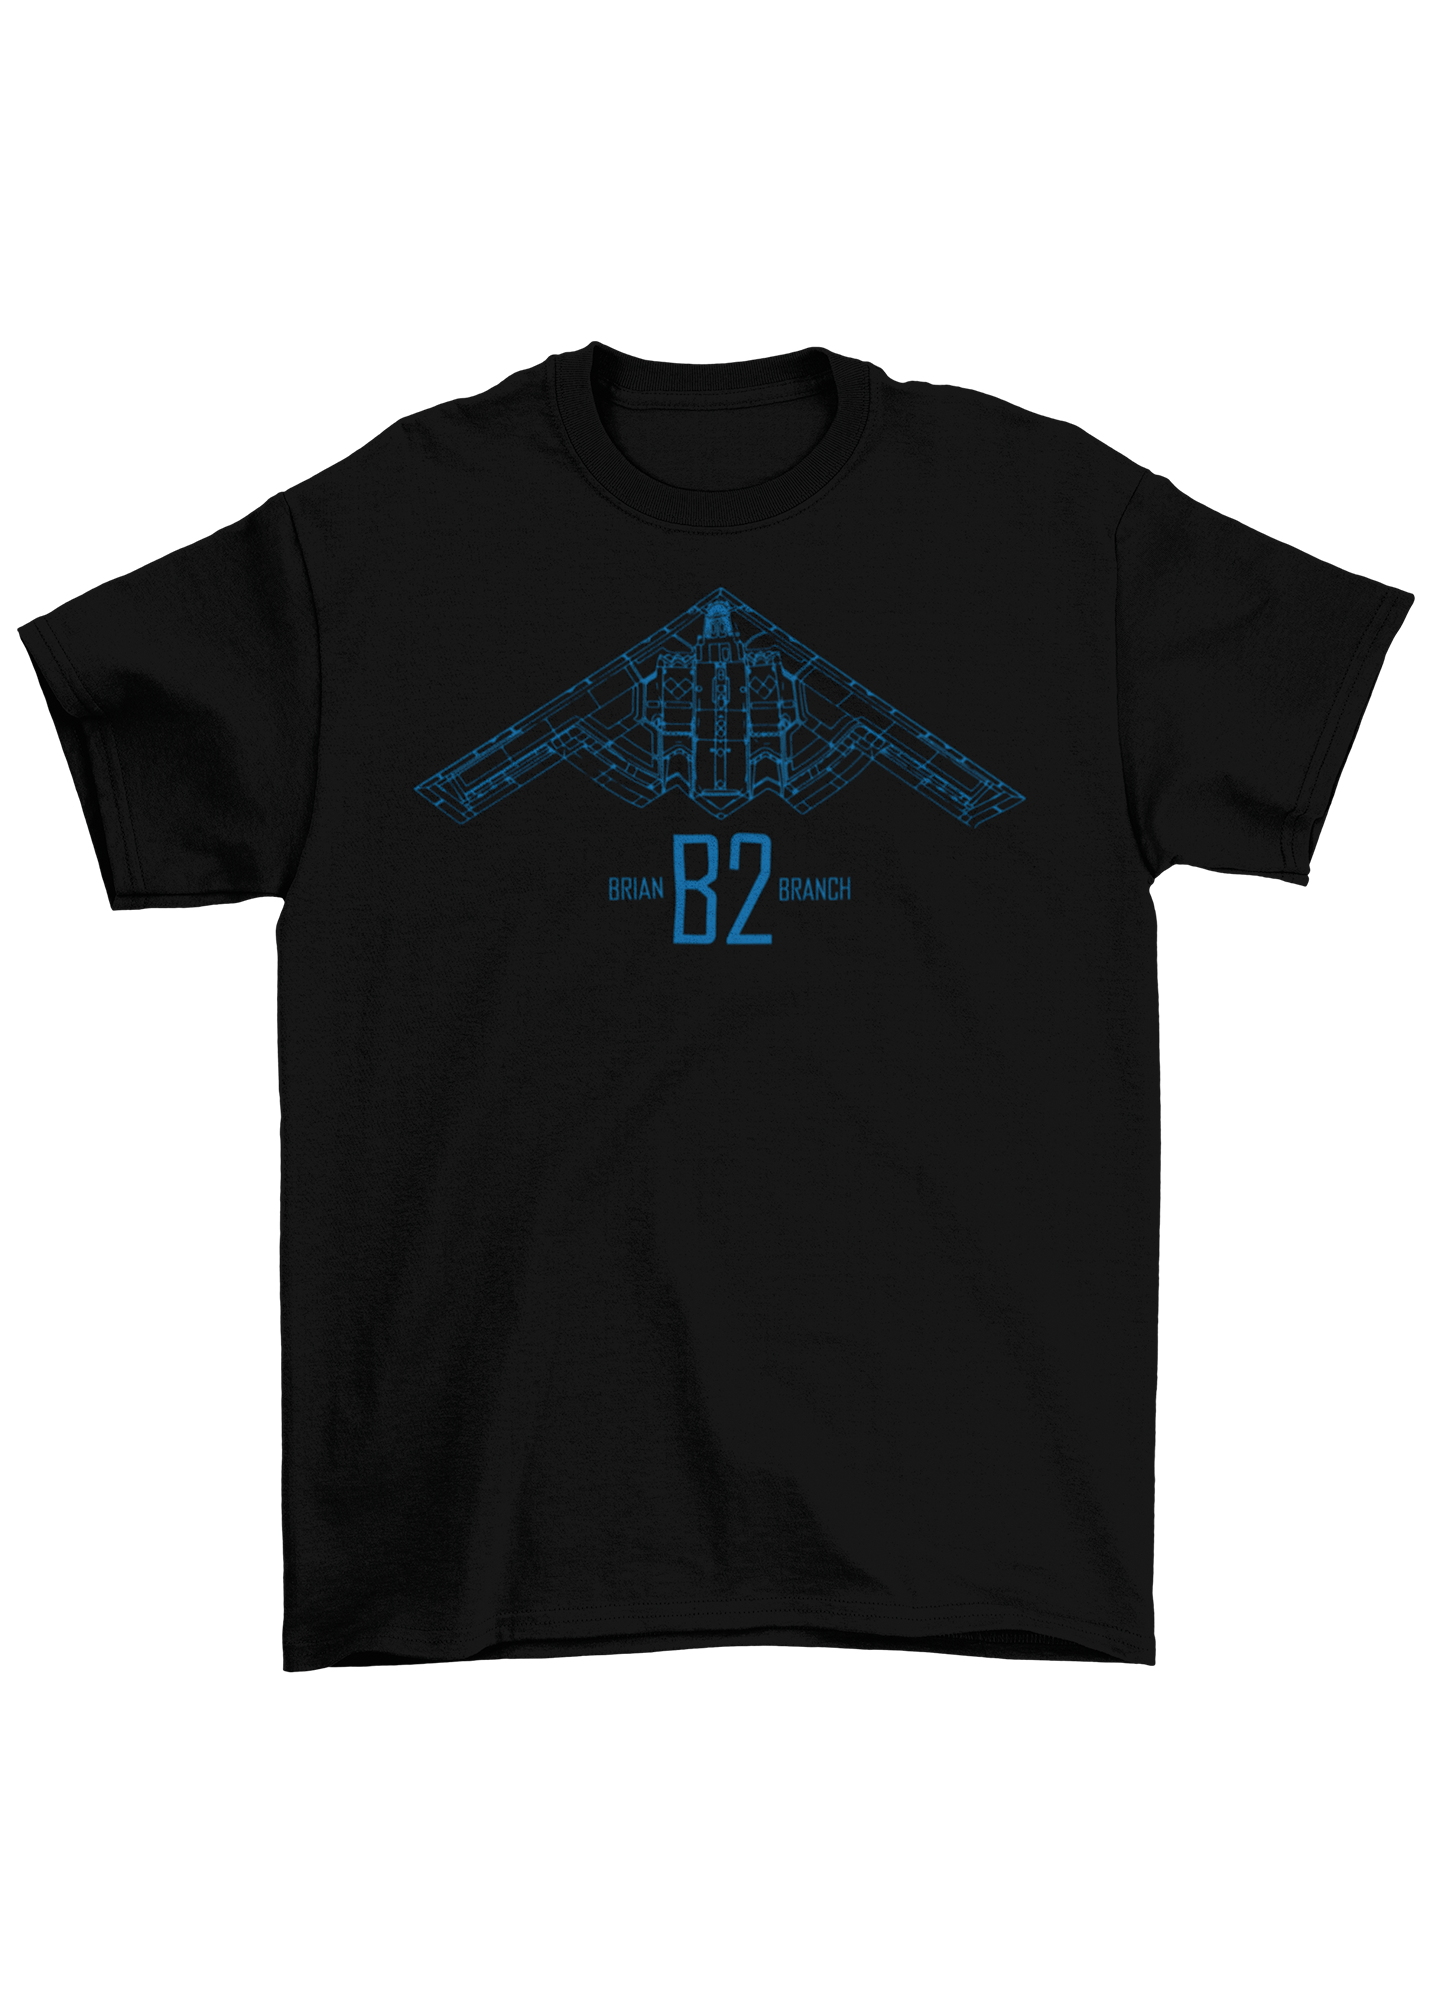 B2 Stealth Bomber Tee - Branch 32